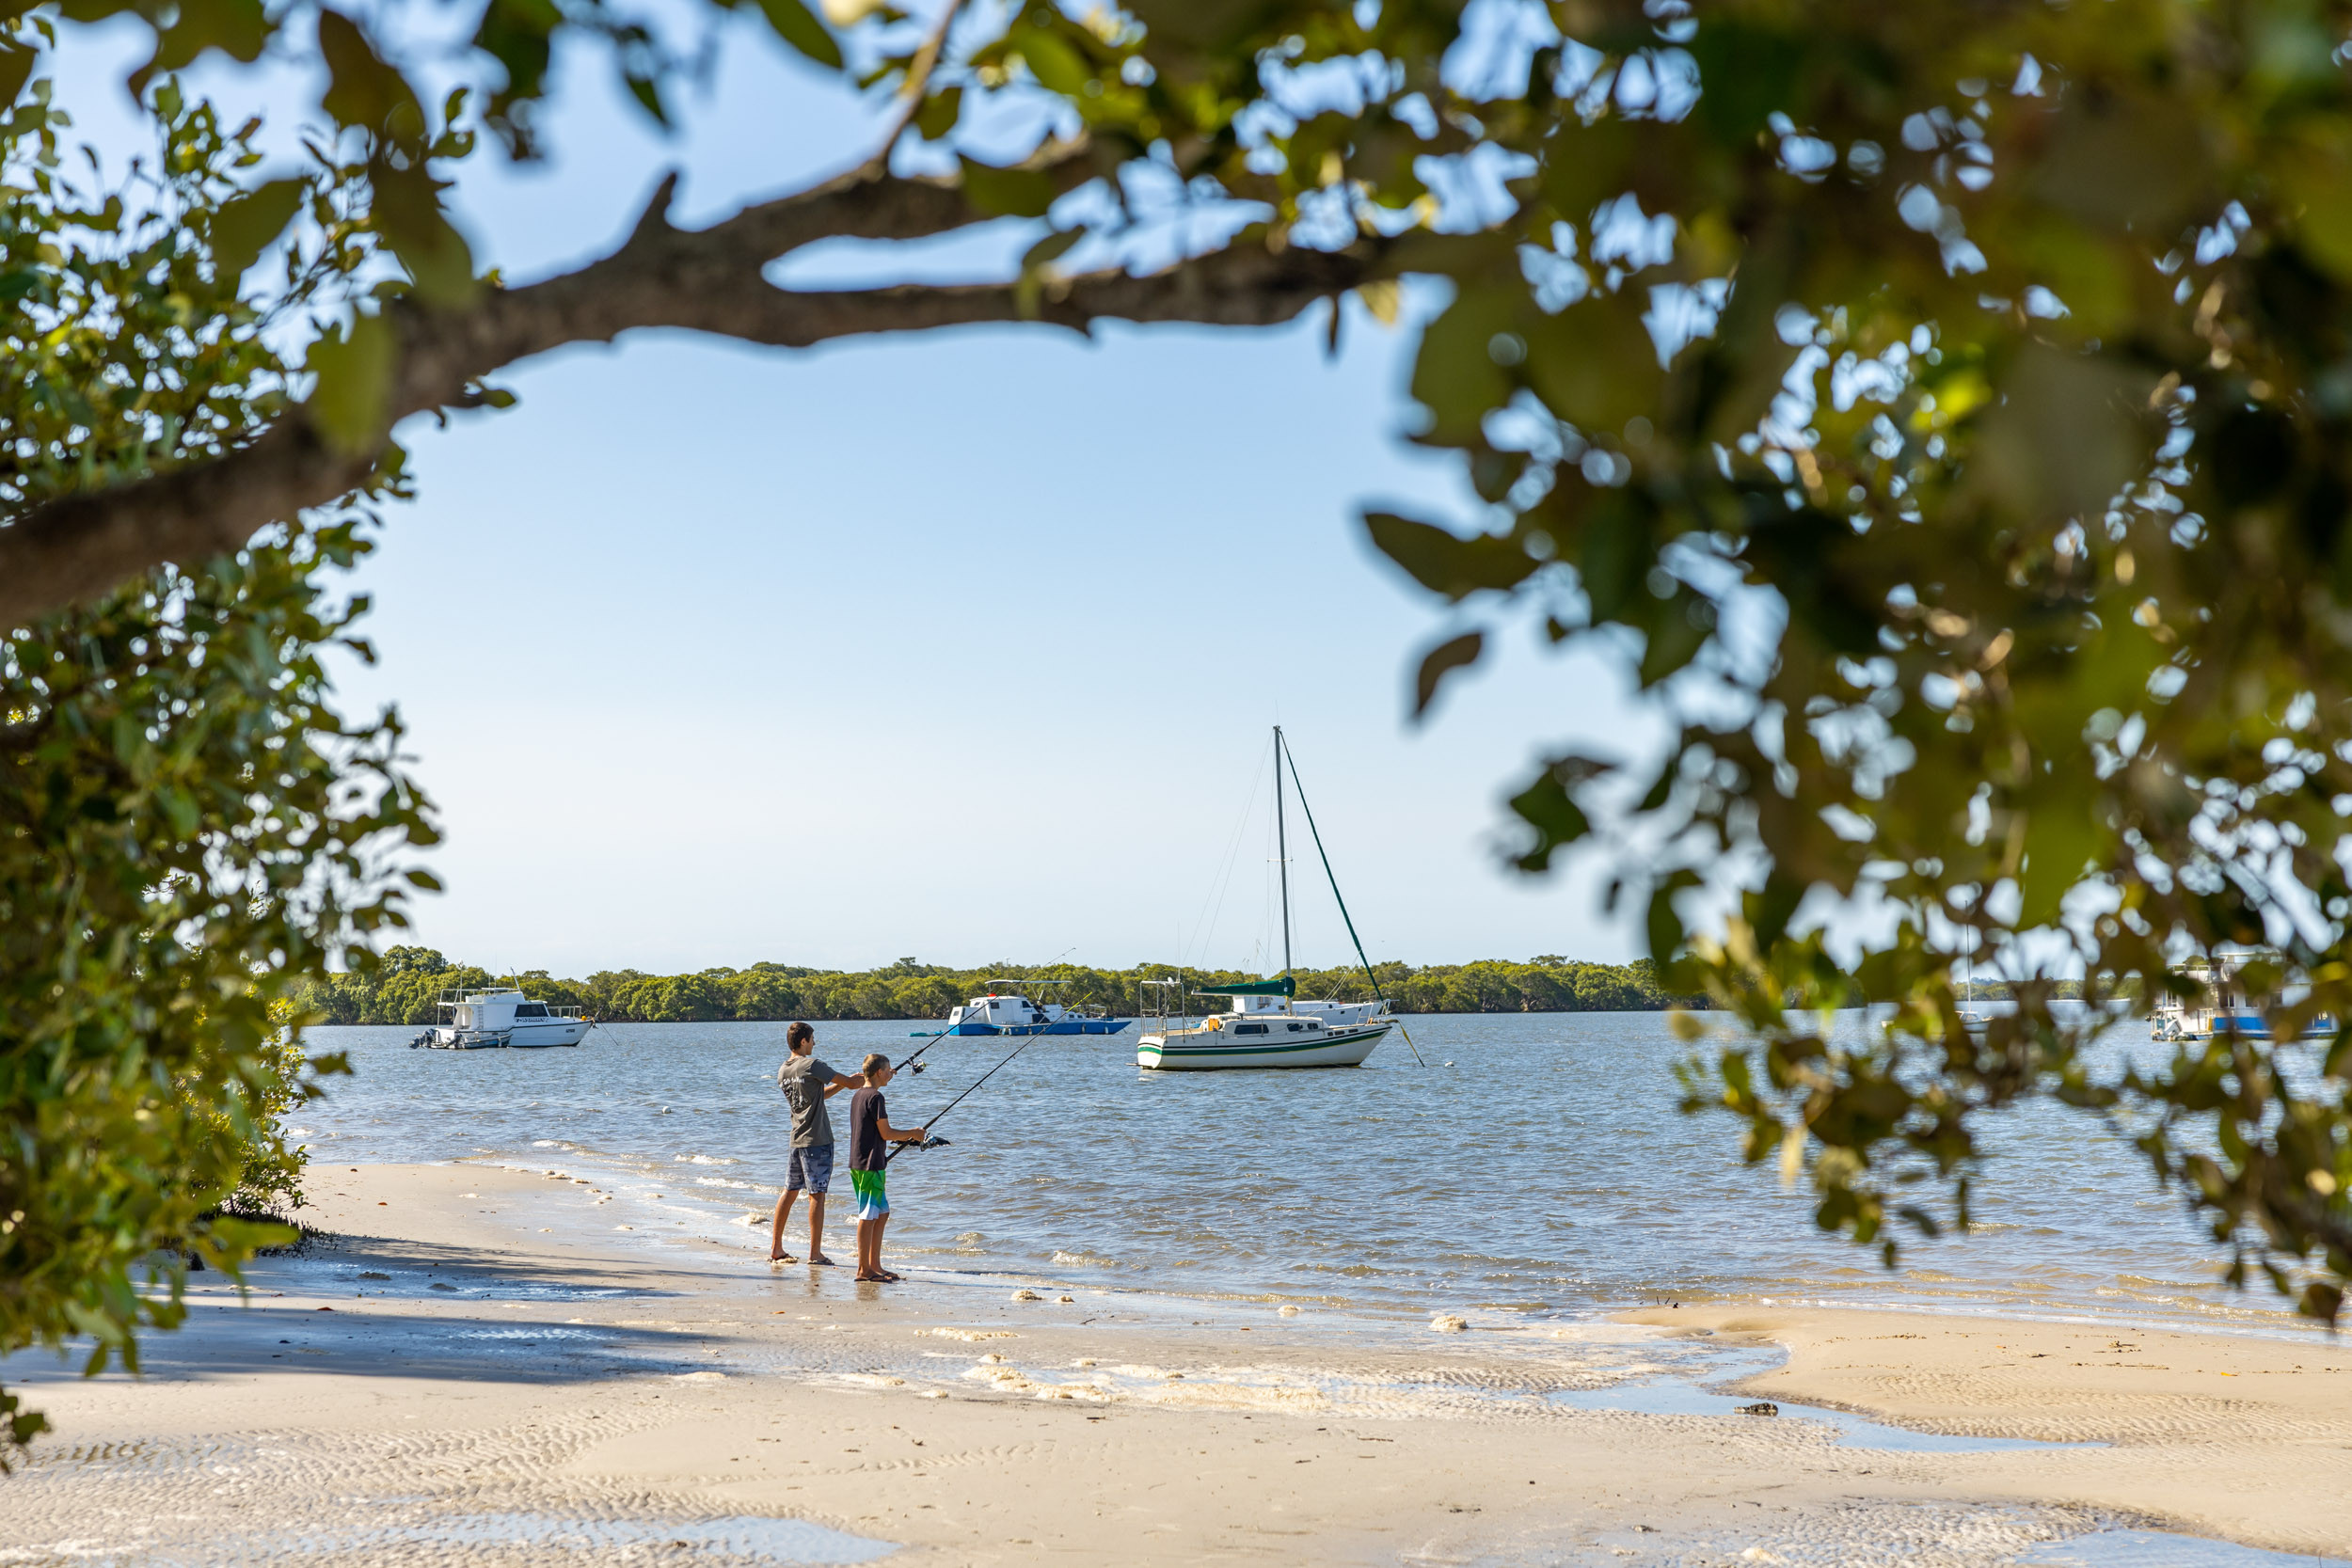 Two boys fishing on the foreshore at Jacobs Well.